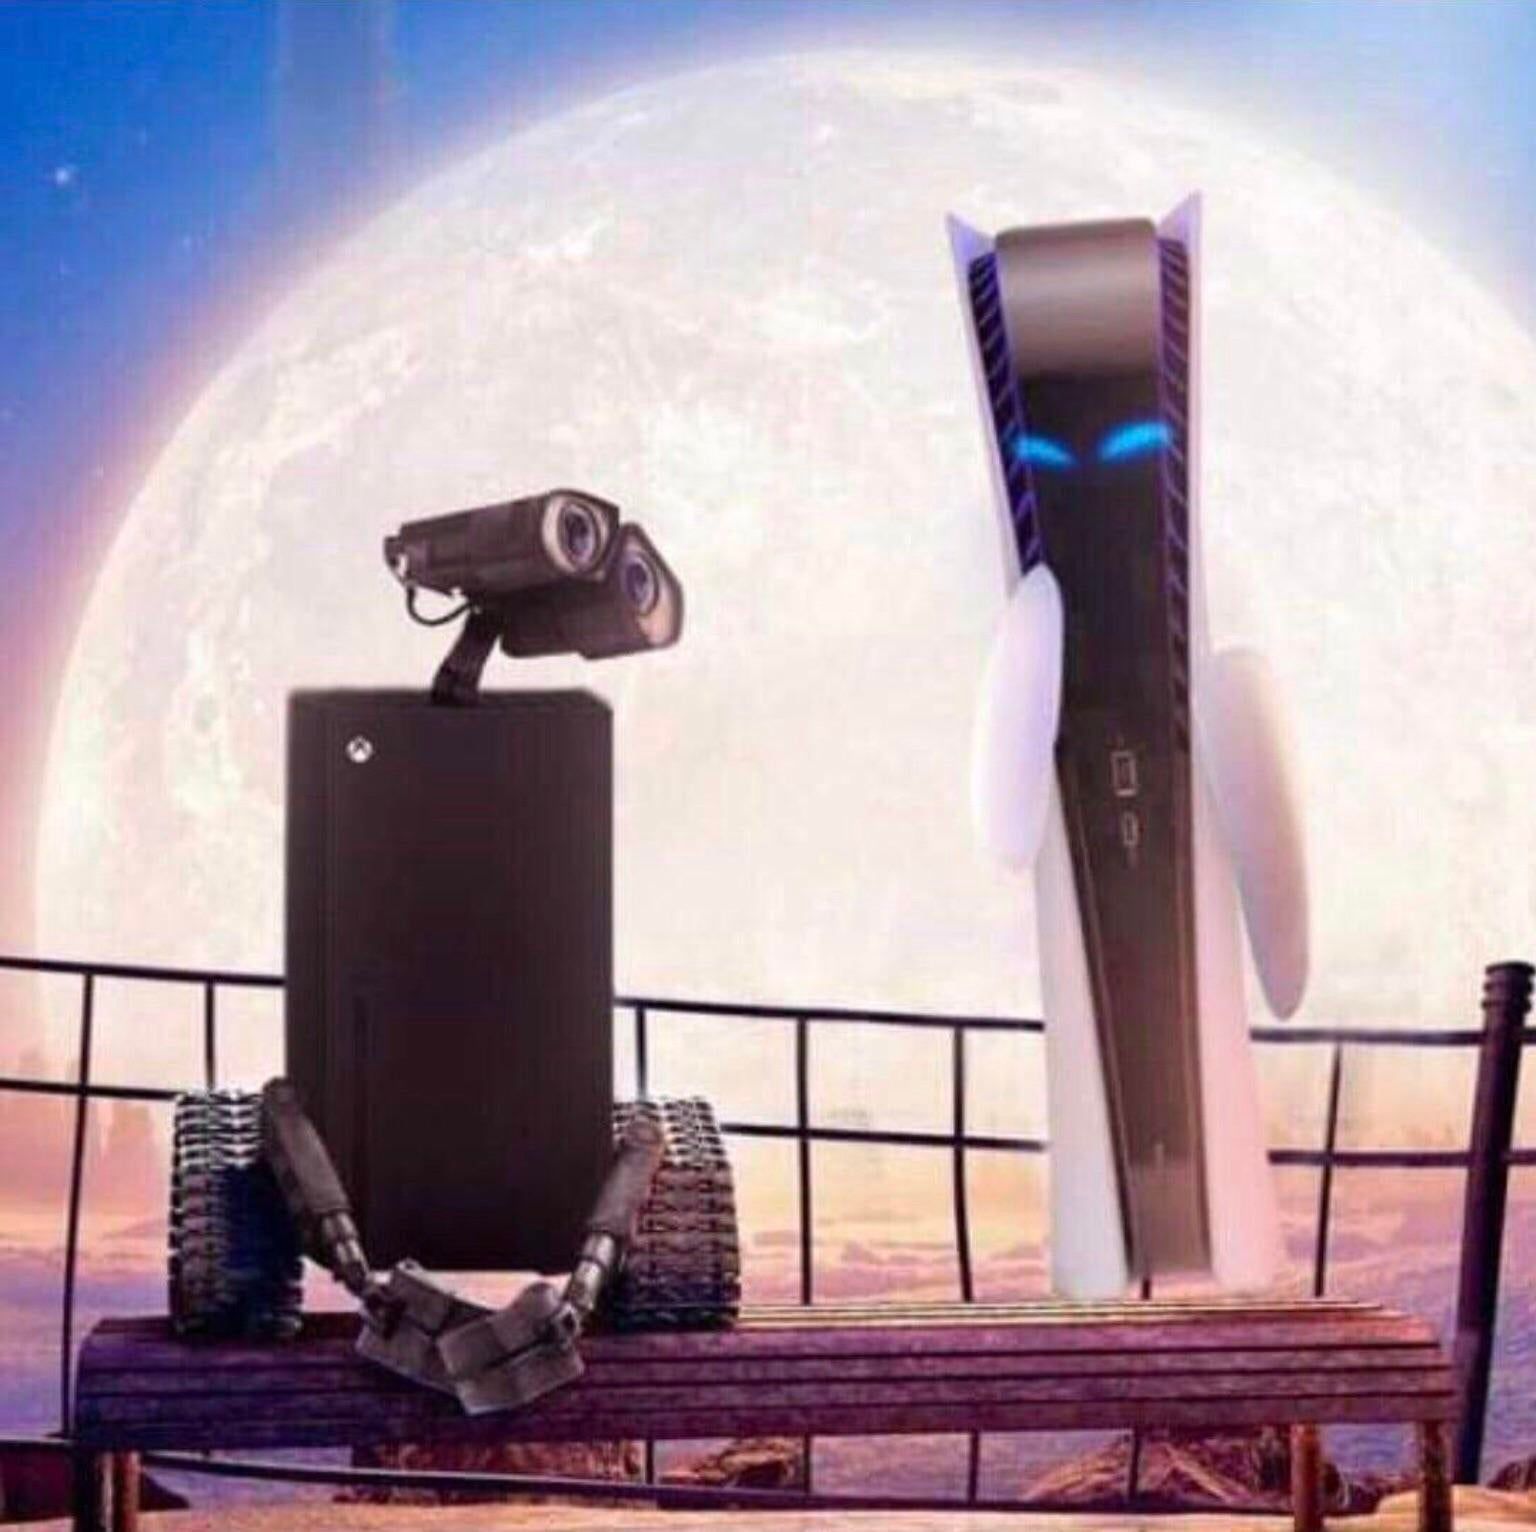 Wall-e is Xbox Series X and EVE is PlayStation 5